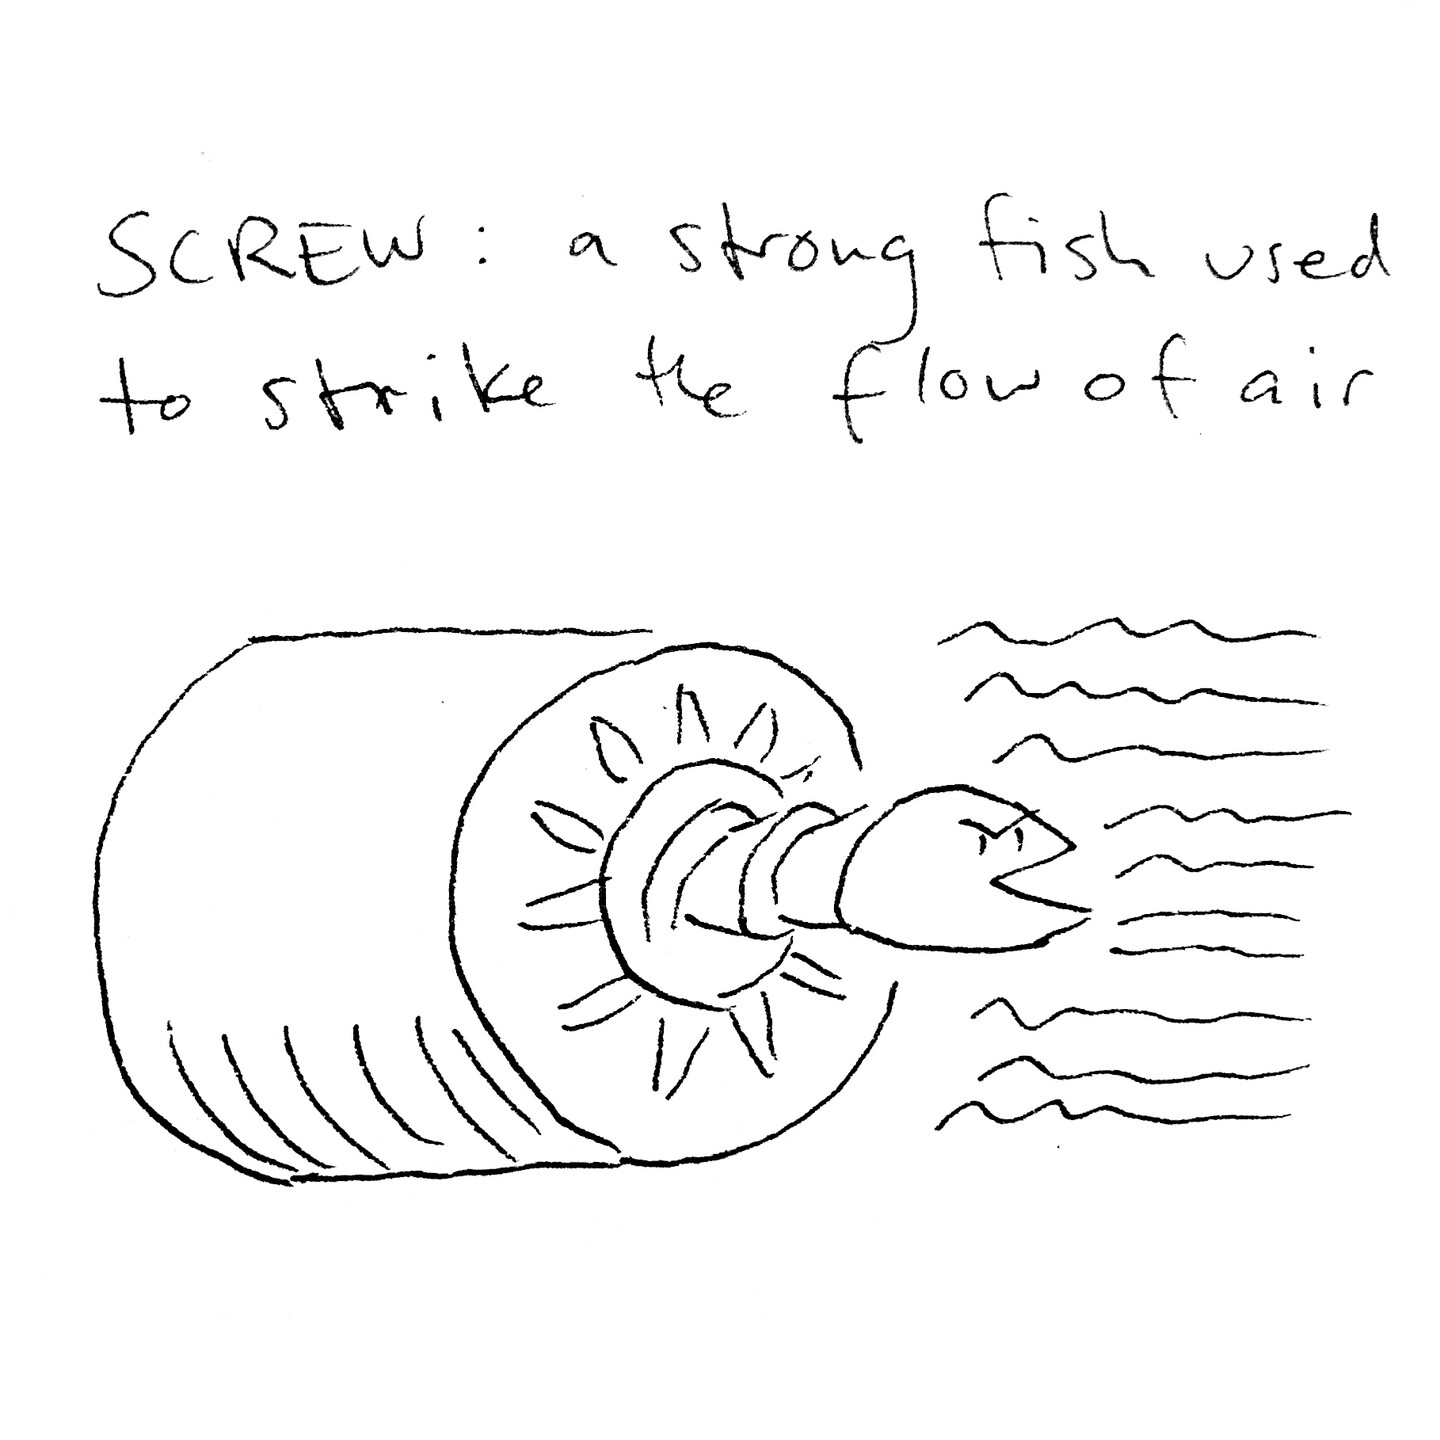 SCREW: a strong fish used to strike the flow of air. The drawing depicts a cylindrical turbine from which emerges a helix ending in a fish’s head, with wavy lines indicating airflow.